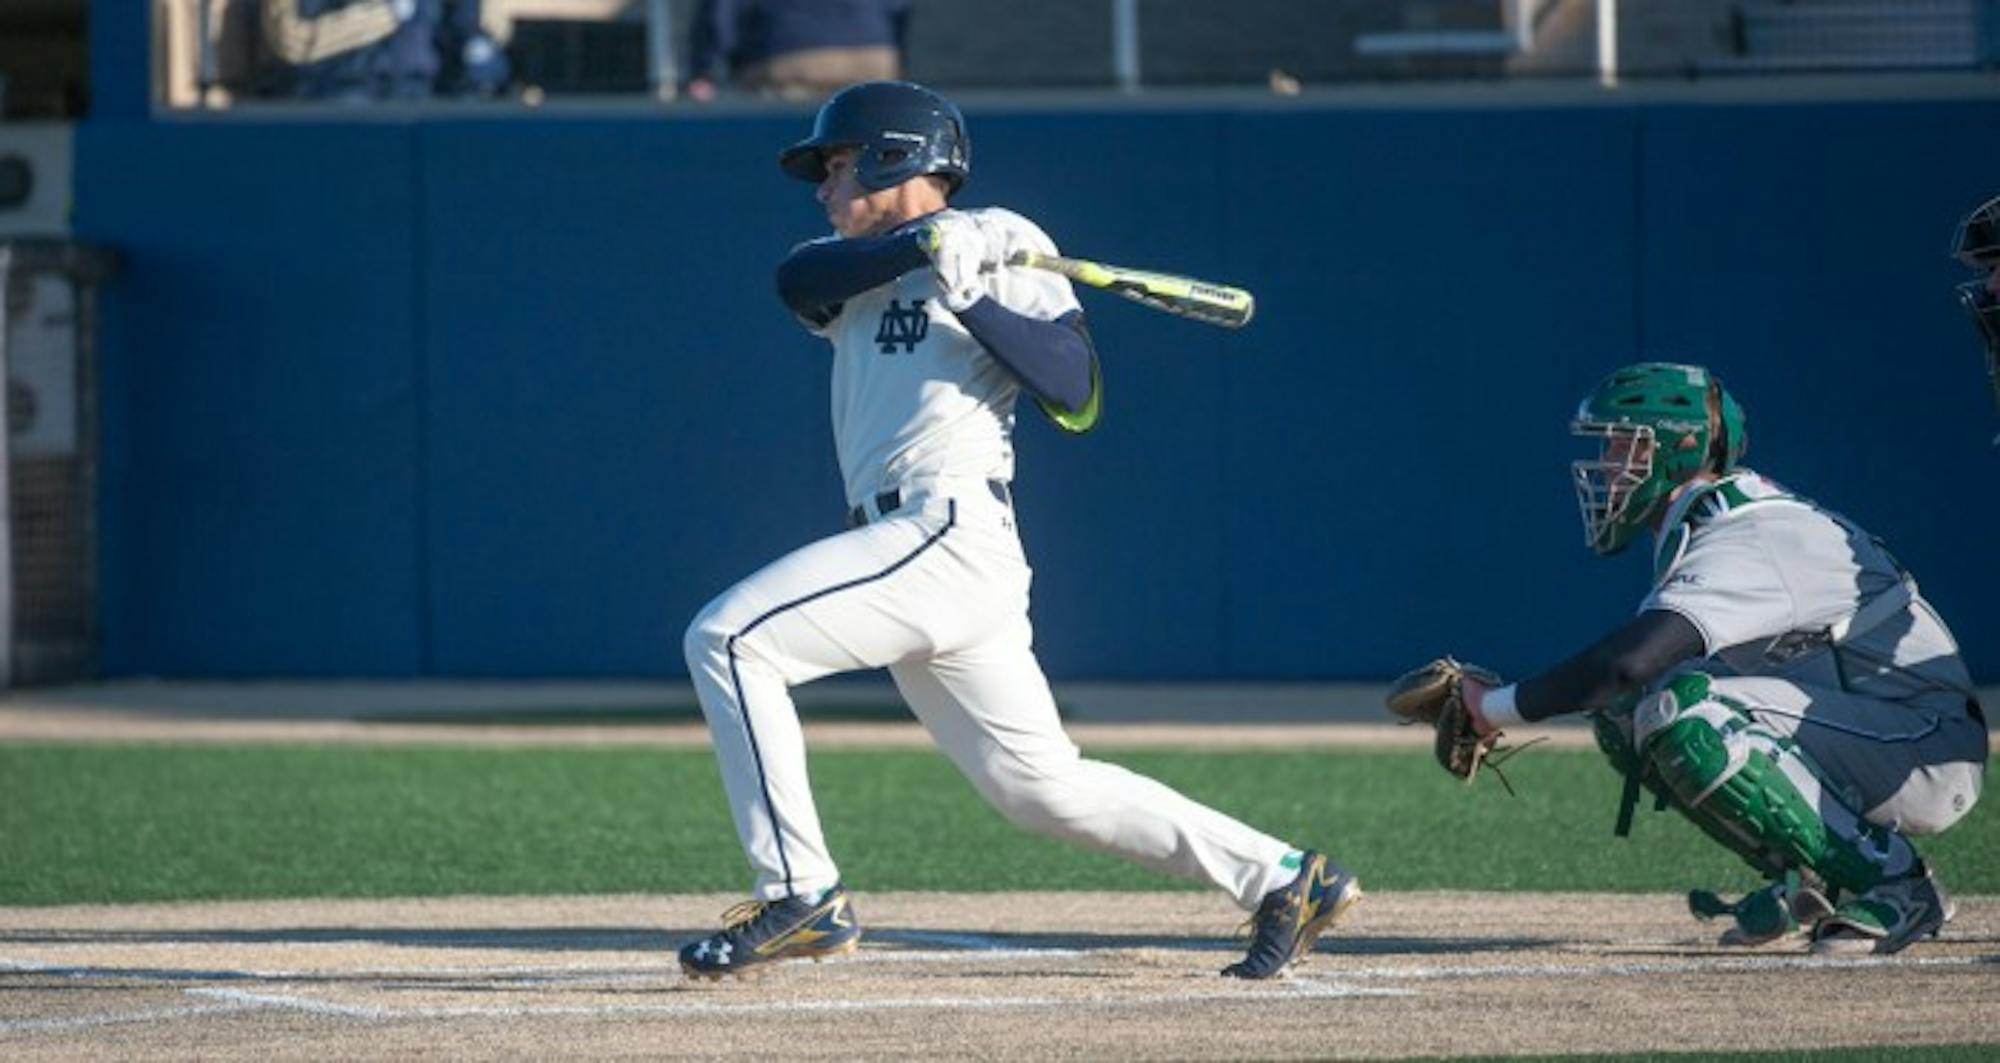 Irish senior catcher Ricky Sanchez finishes a swing during Notre Dame’s 4-1 win over Boston College at Frank Eck Stadium on April 15. Sanchez leads the squad with a .345 batting average this season.